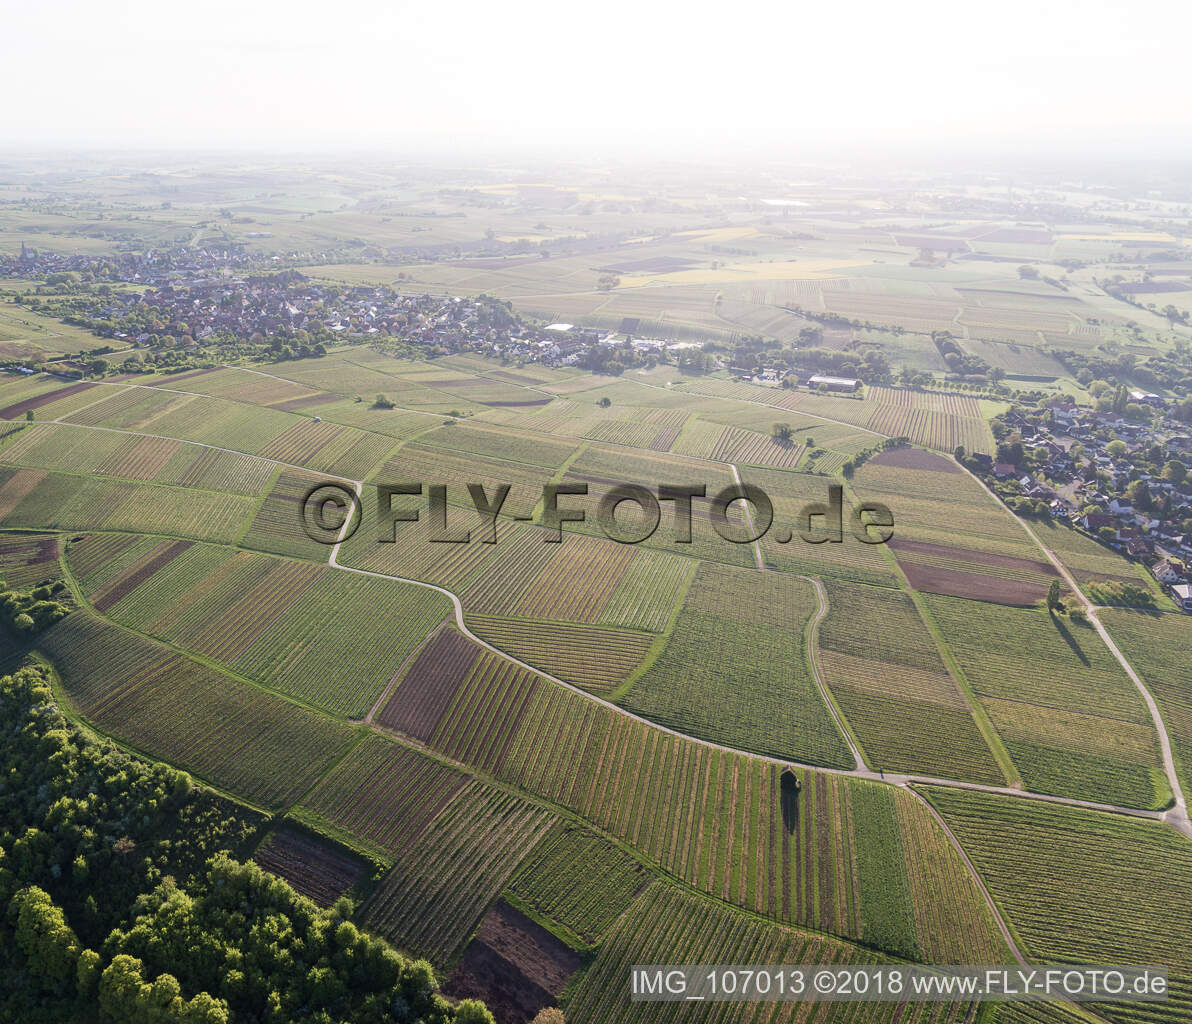 Aerial view of Sonnenberg vineyard in Wissembourg in the state Bas-Rhin, France